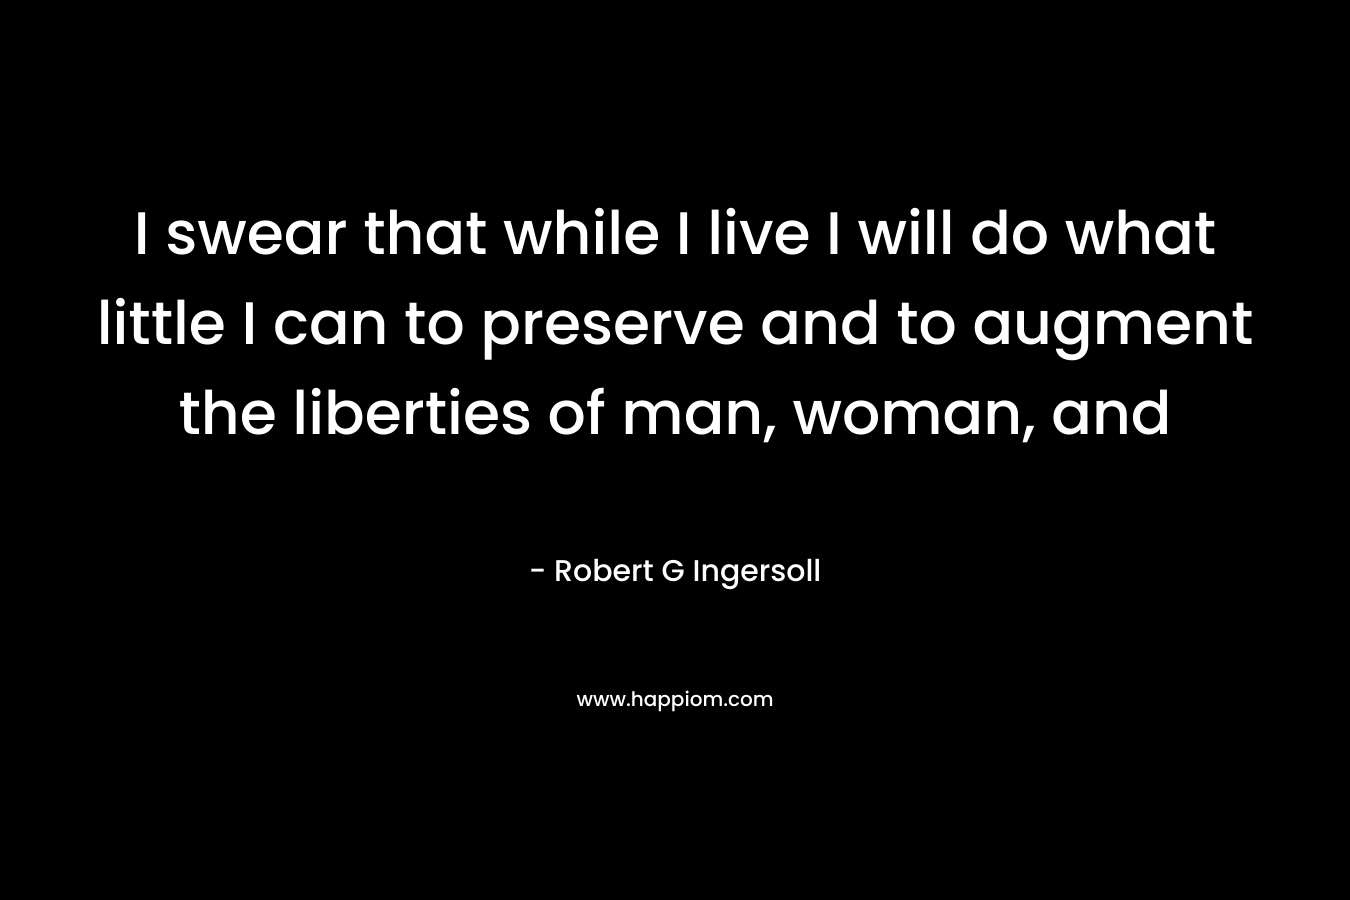 I swear that while I live I will do what little I can to preserve and to augment the liberties of man, woman, and  – Robert G Ingersoll